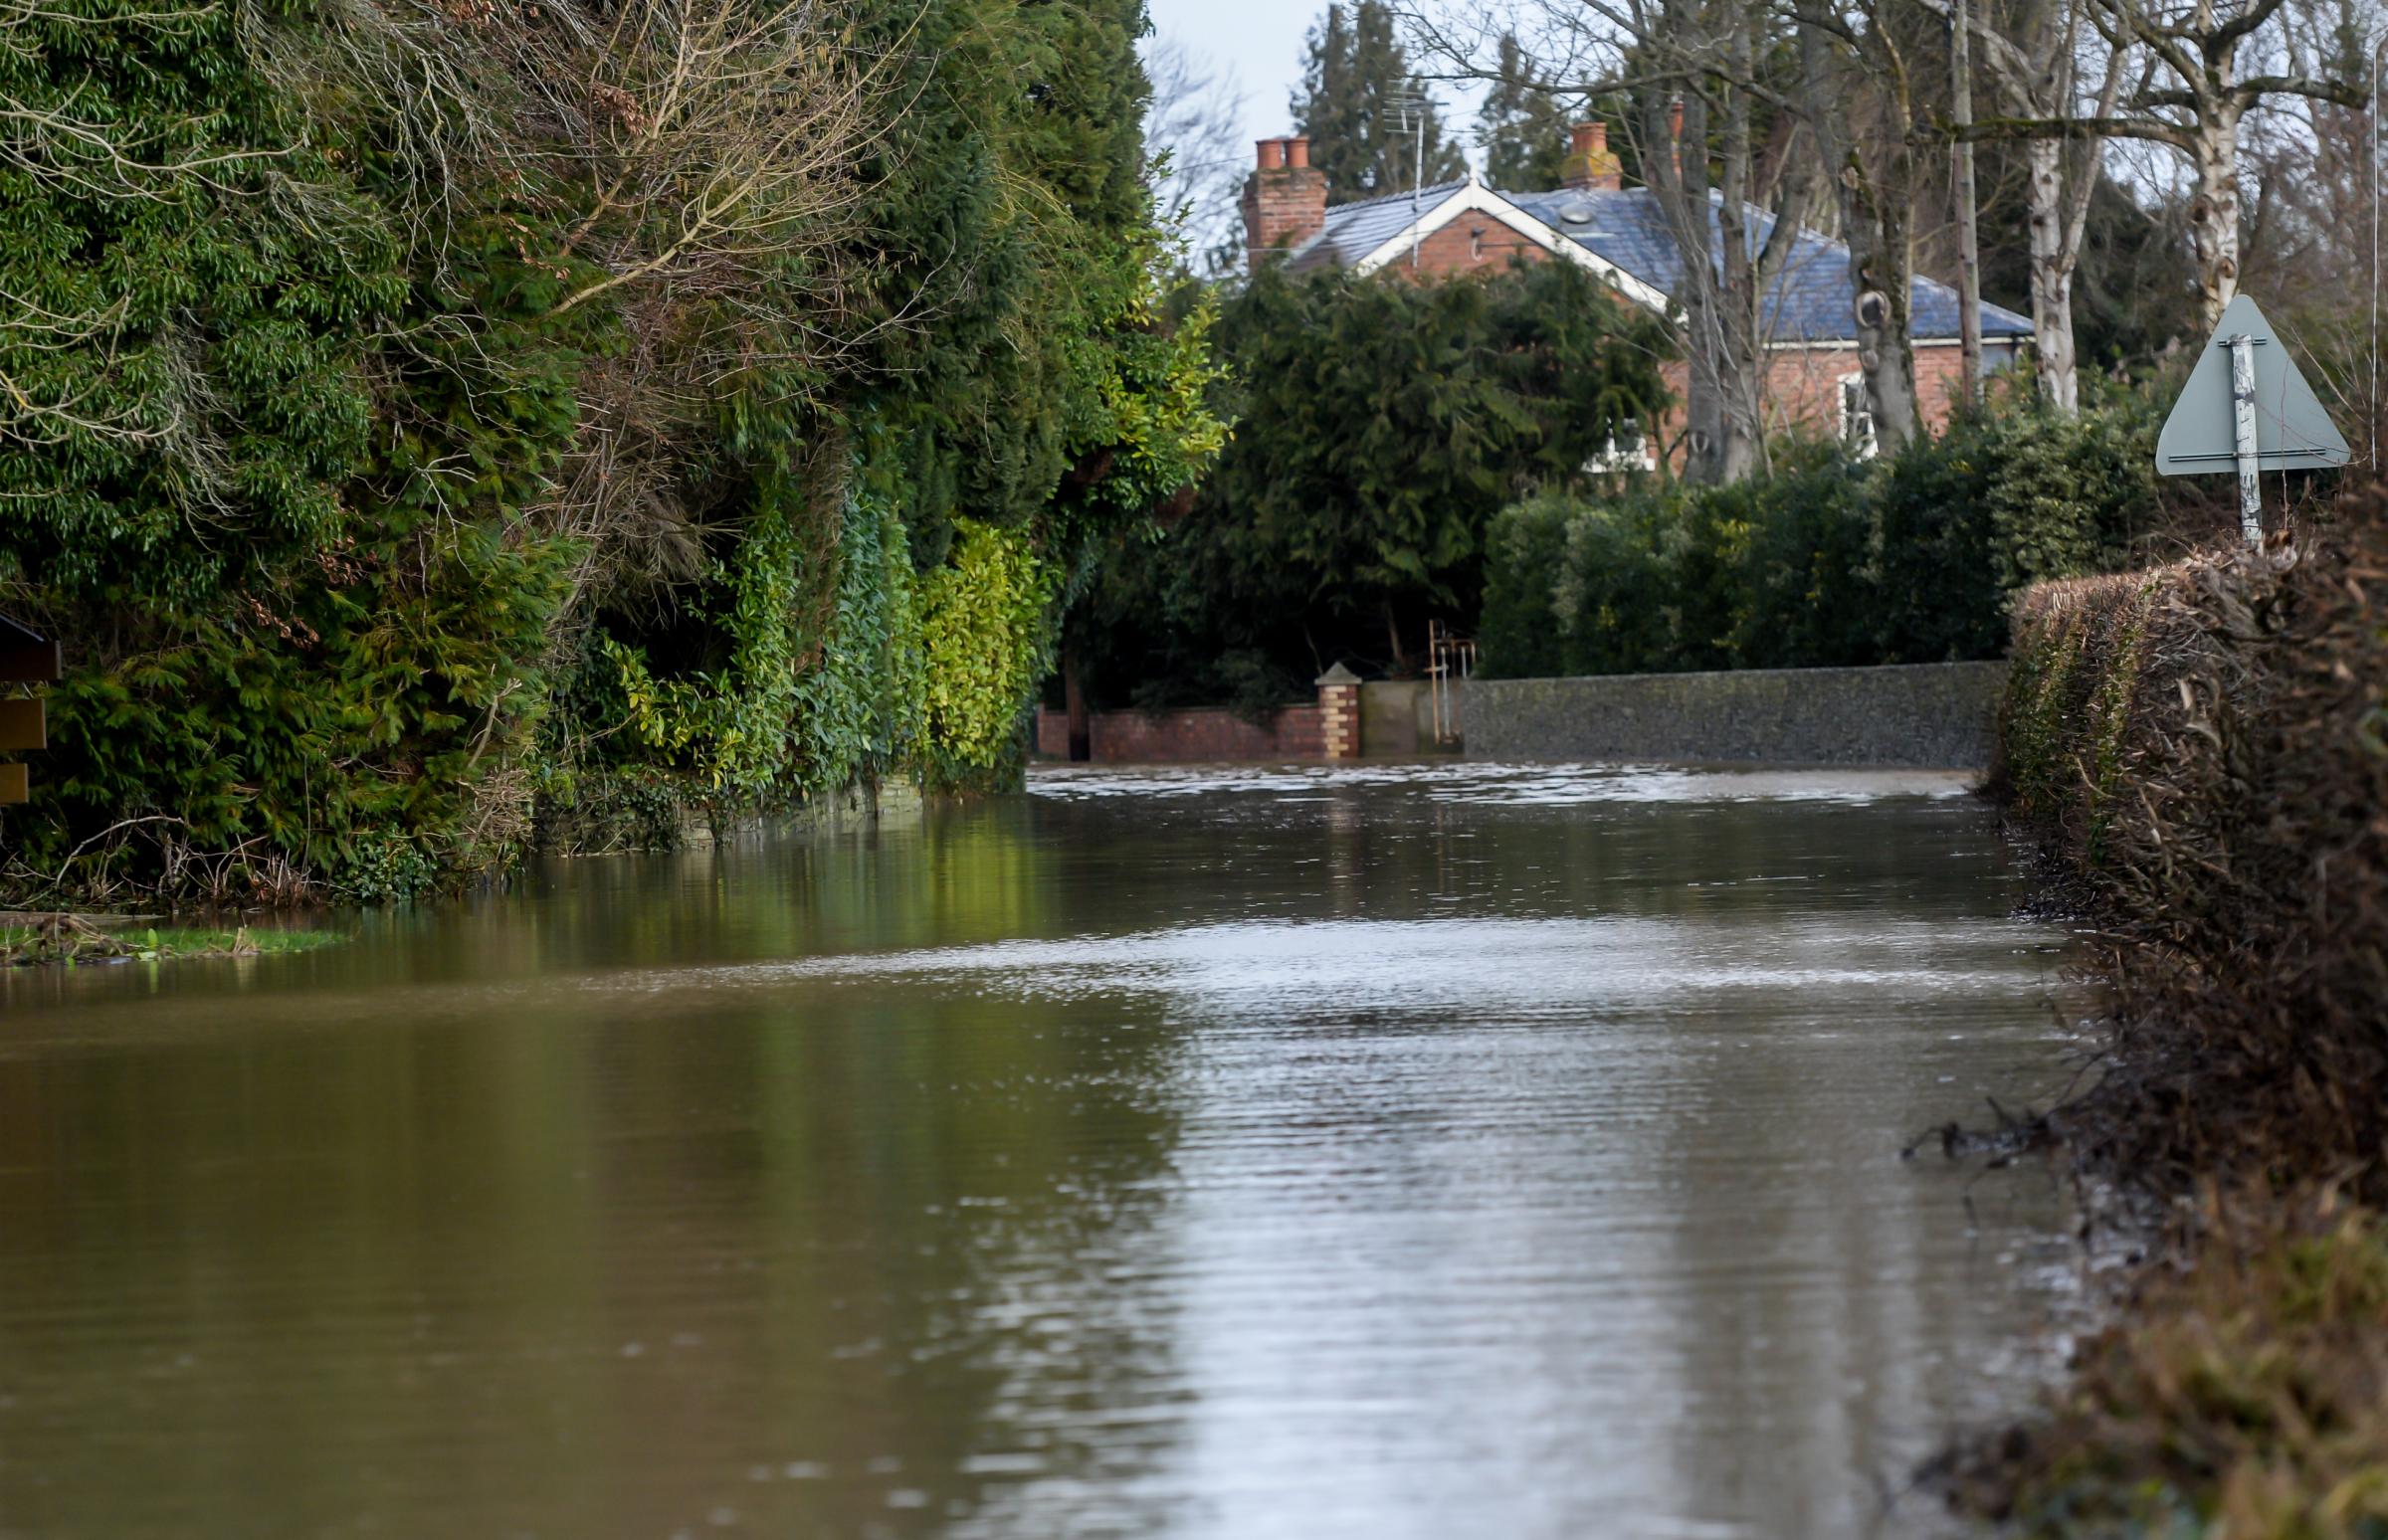 Pictured is the flooded road that cut off access to Eardisland this morning.